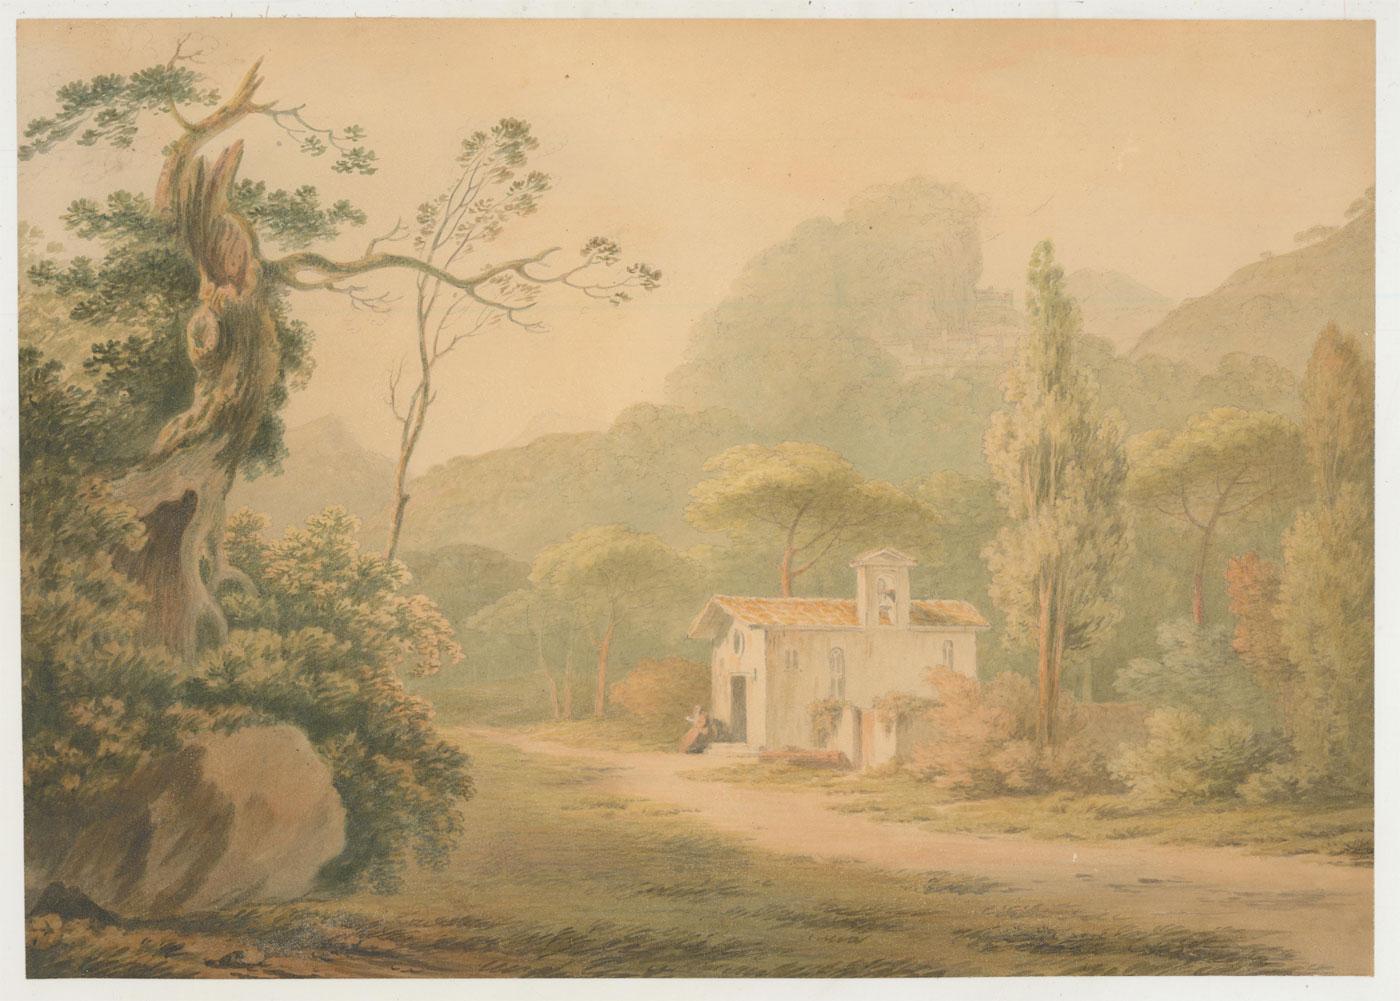 After John Warwick Smith - Original 19th Century Watercolour.  Unsigned. Condition is typical for a picture of this age including some discolouration.
